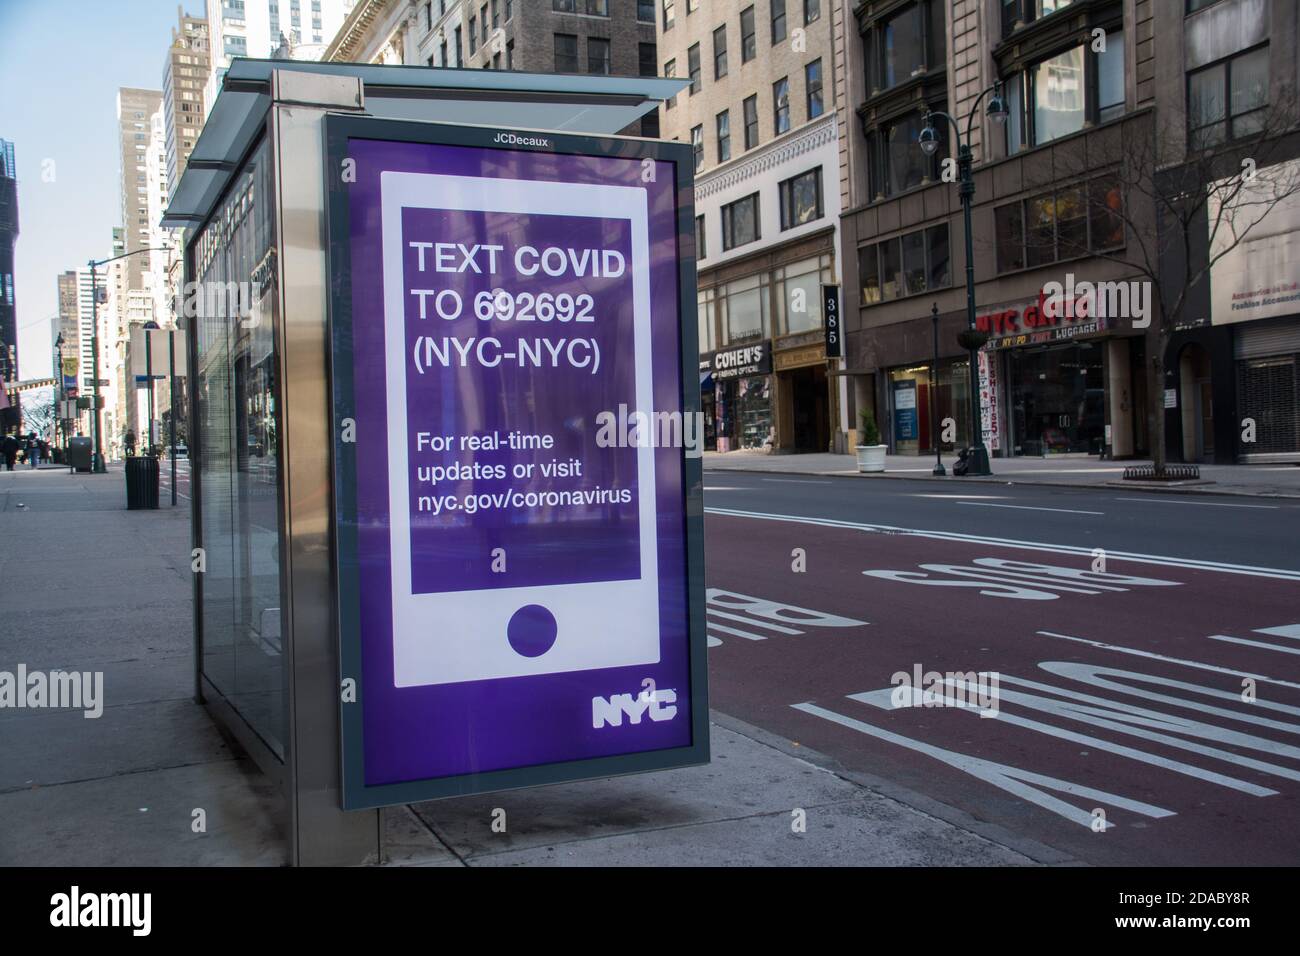 Covid-19 Pandemic Instructions on Digital Sign in Manhattan Foto Stock